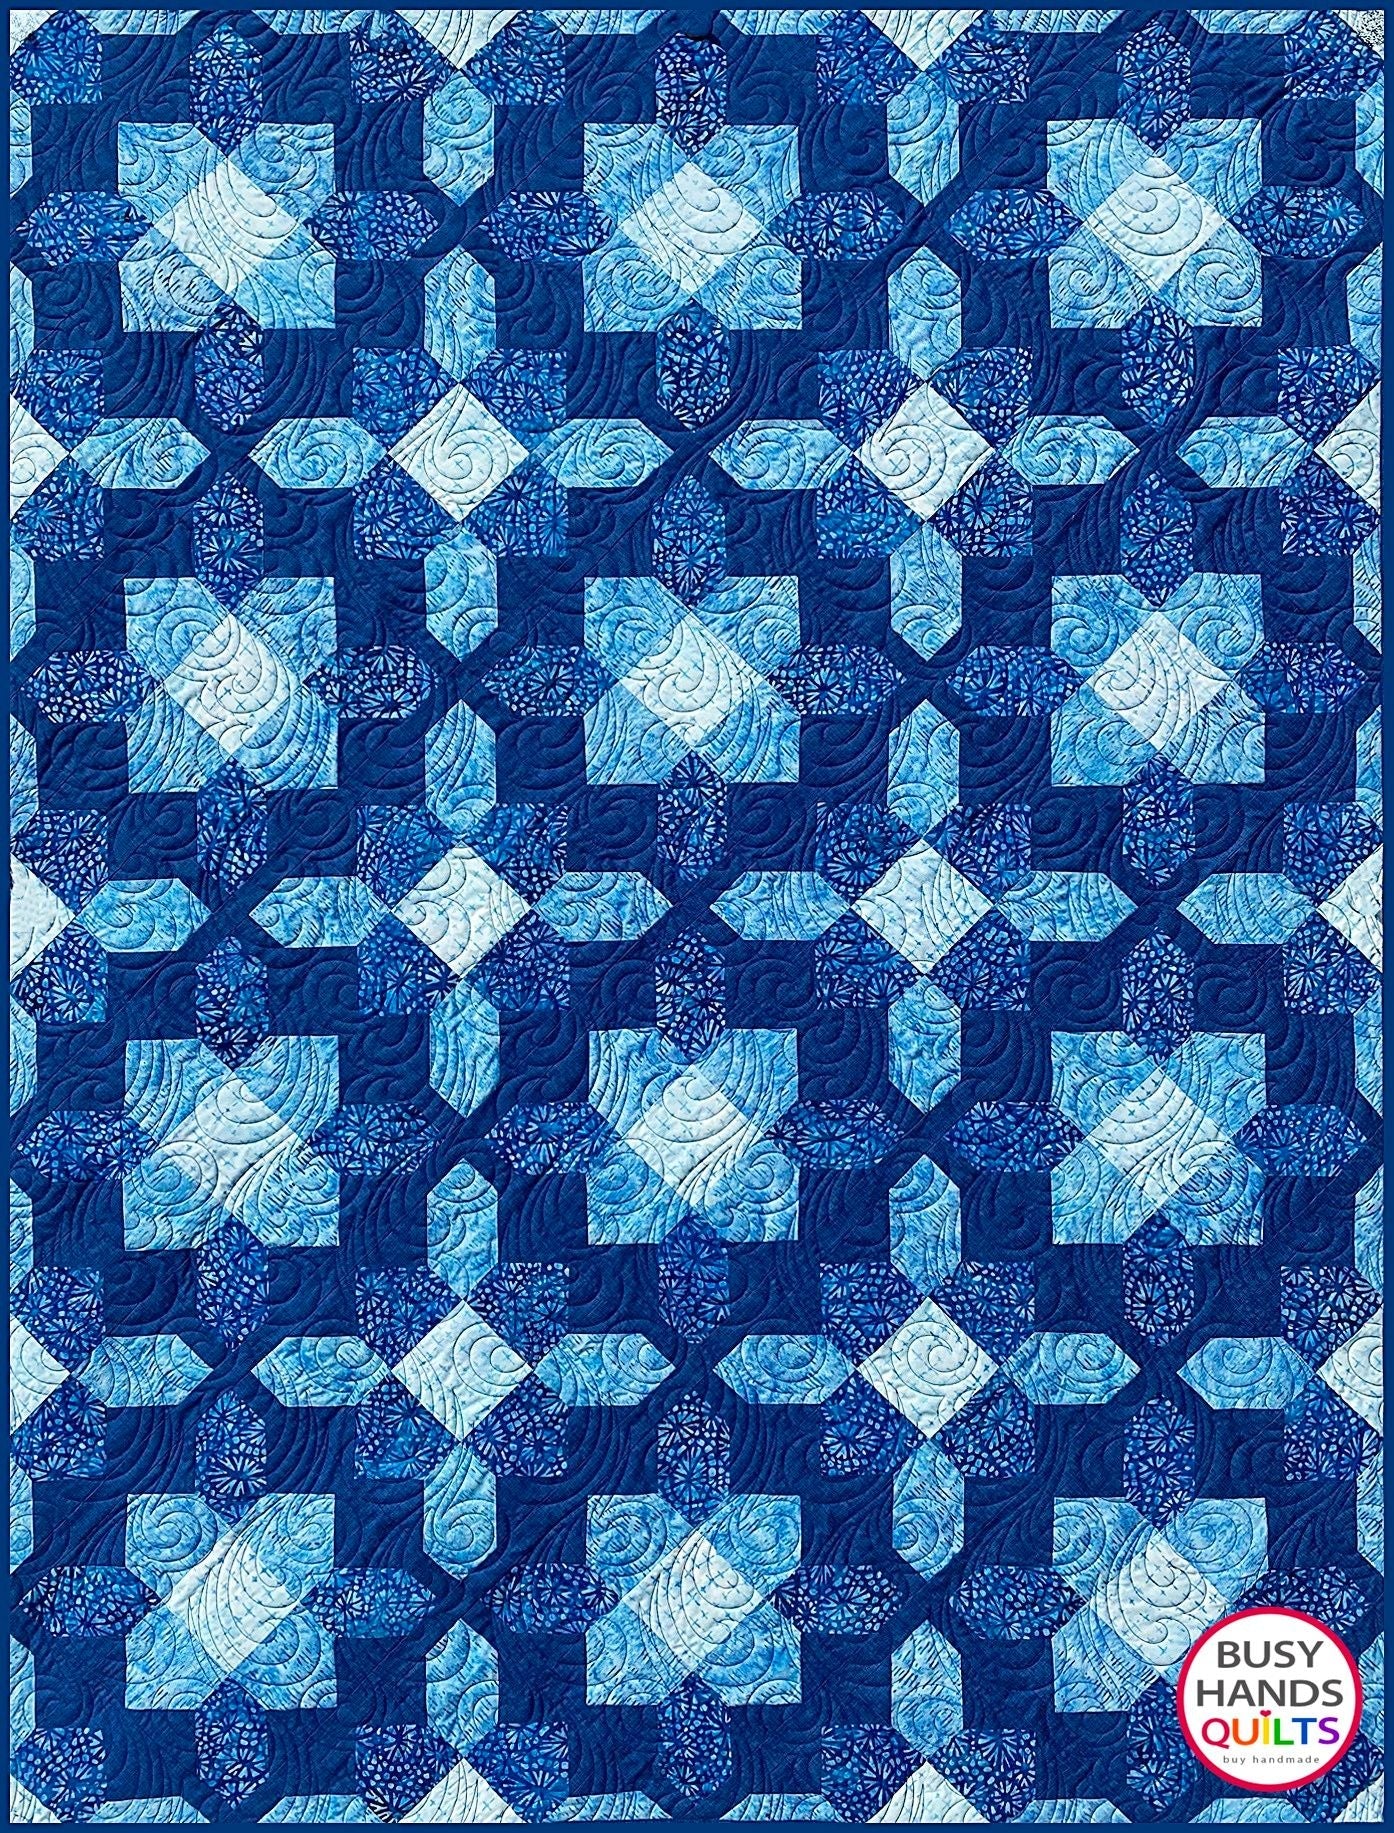 Sweet Comfort Quilt Pattern PDF DOWNLOAD Busy Hands Quilts $12.99